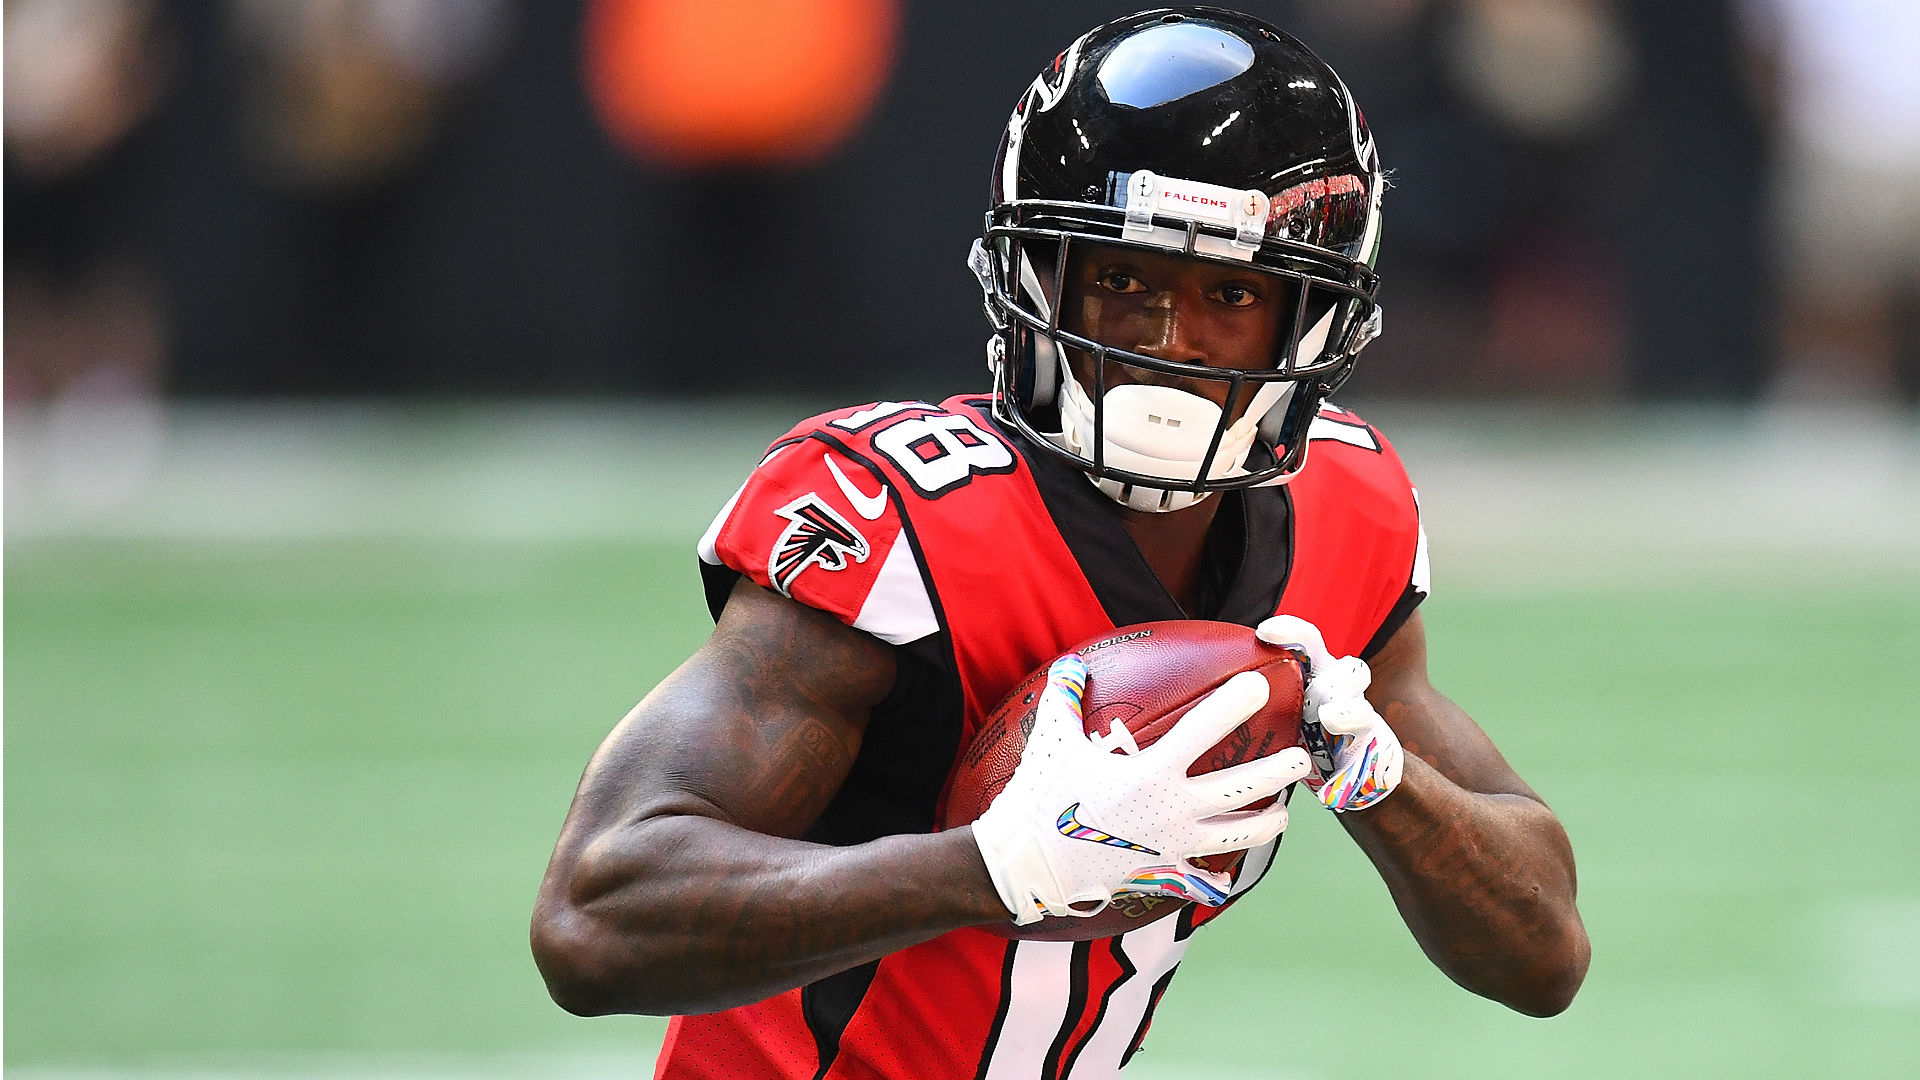 Flipboard: Calvin Ridley injury update: Falcons rookie WR expected to play against Giants